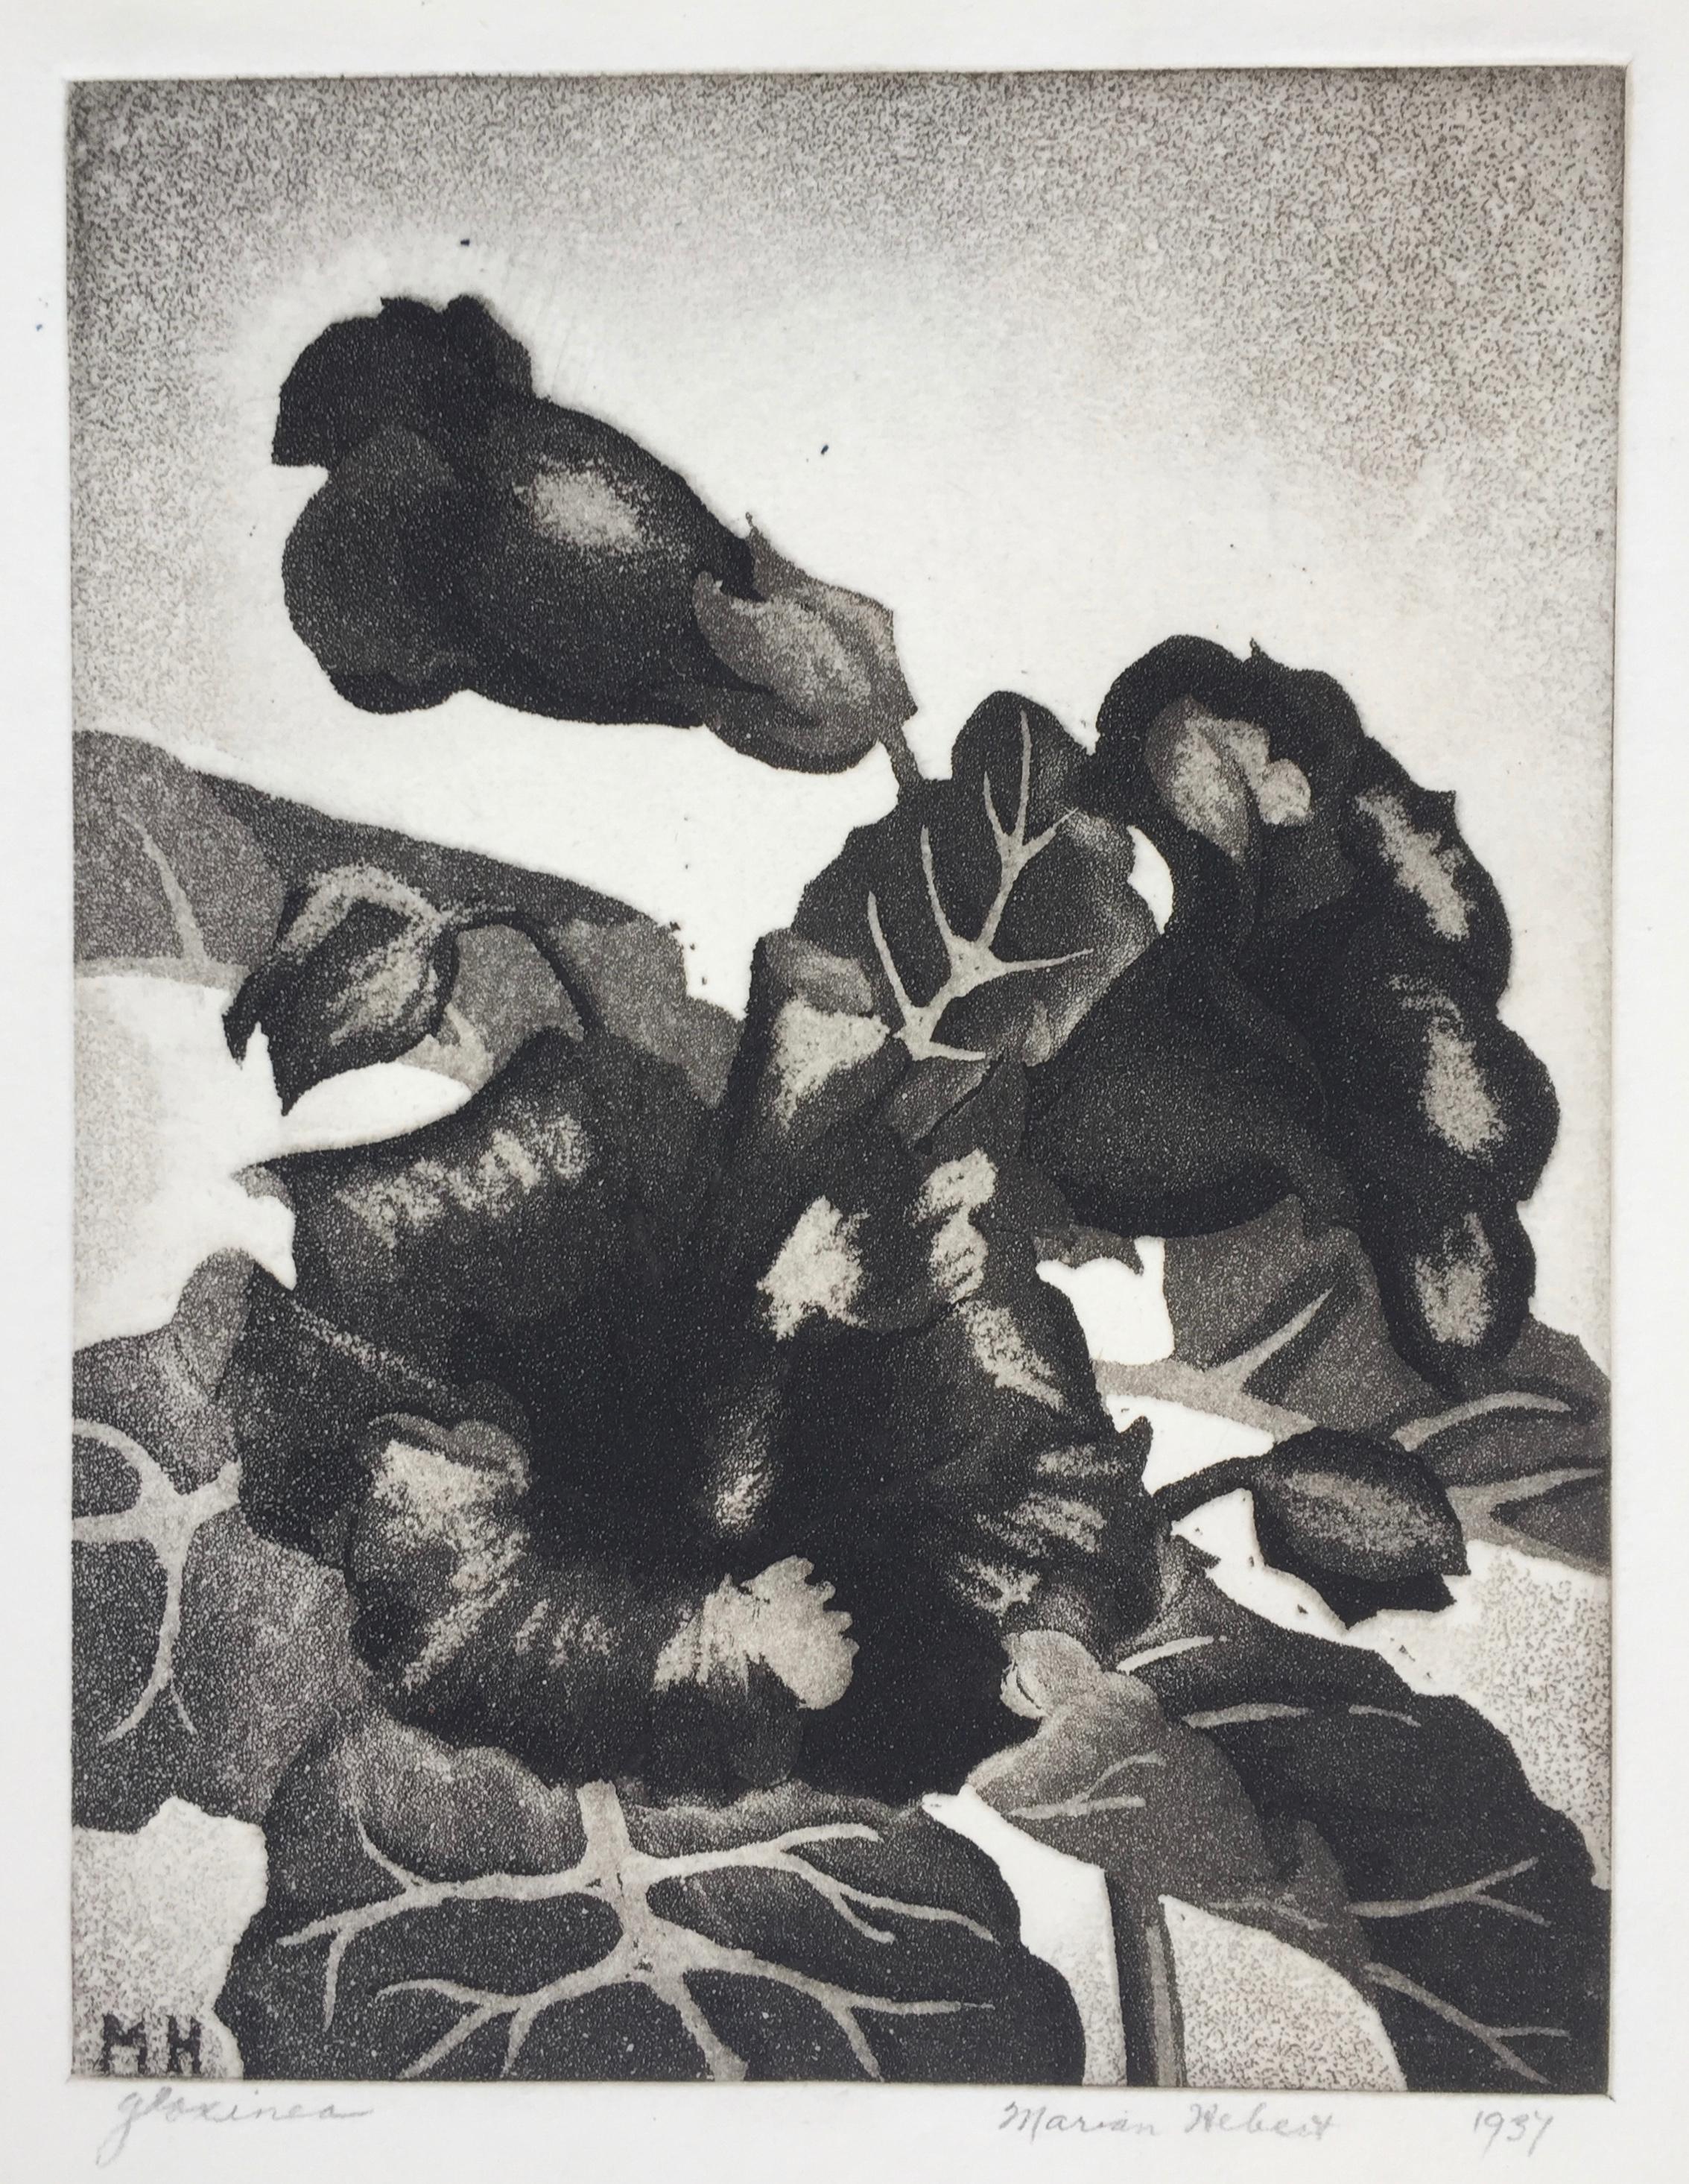 GLOXINIA - Published by the WPA / Federal Art Project with Label. - Print by Marian Hebert